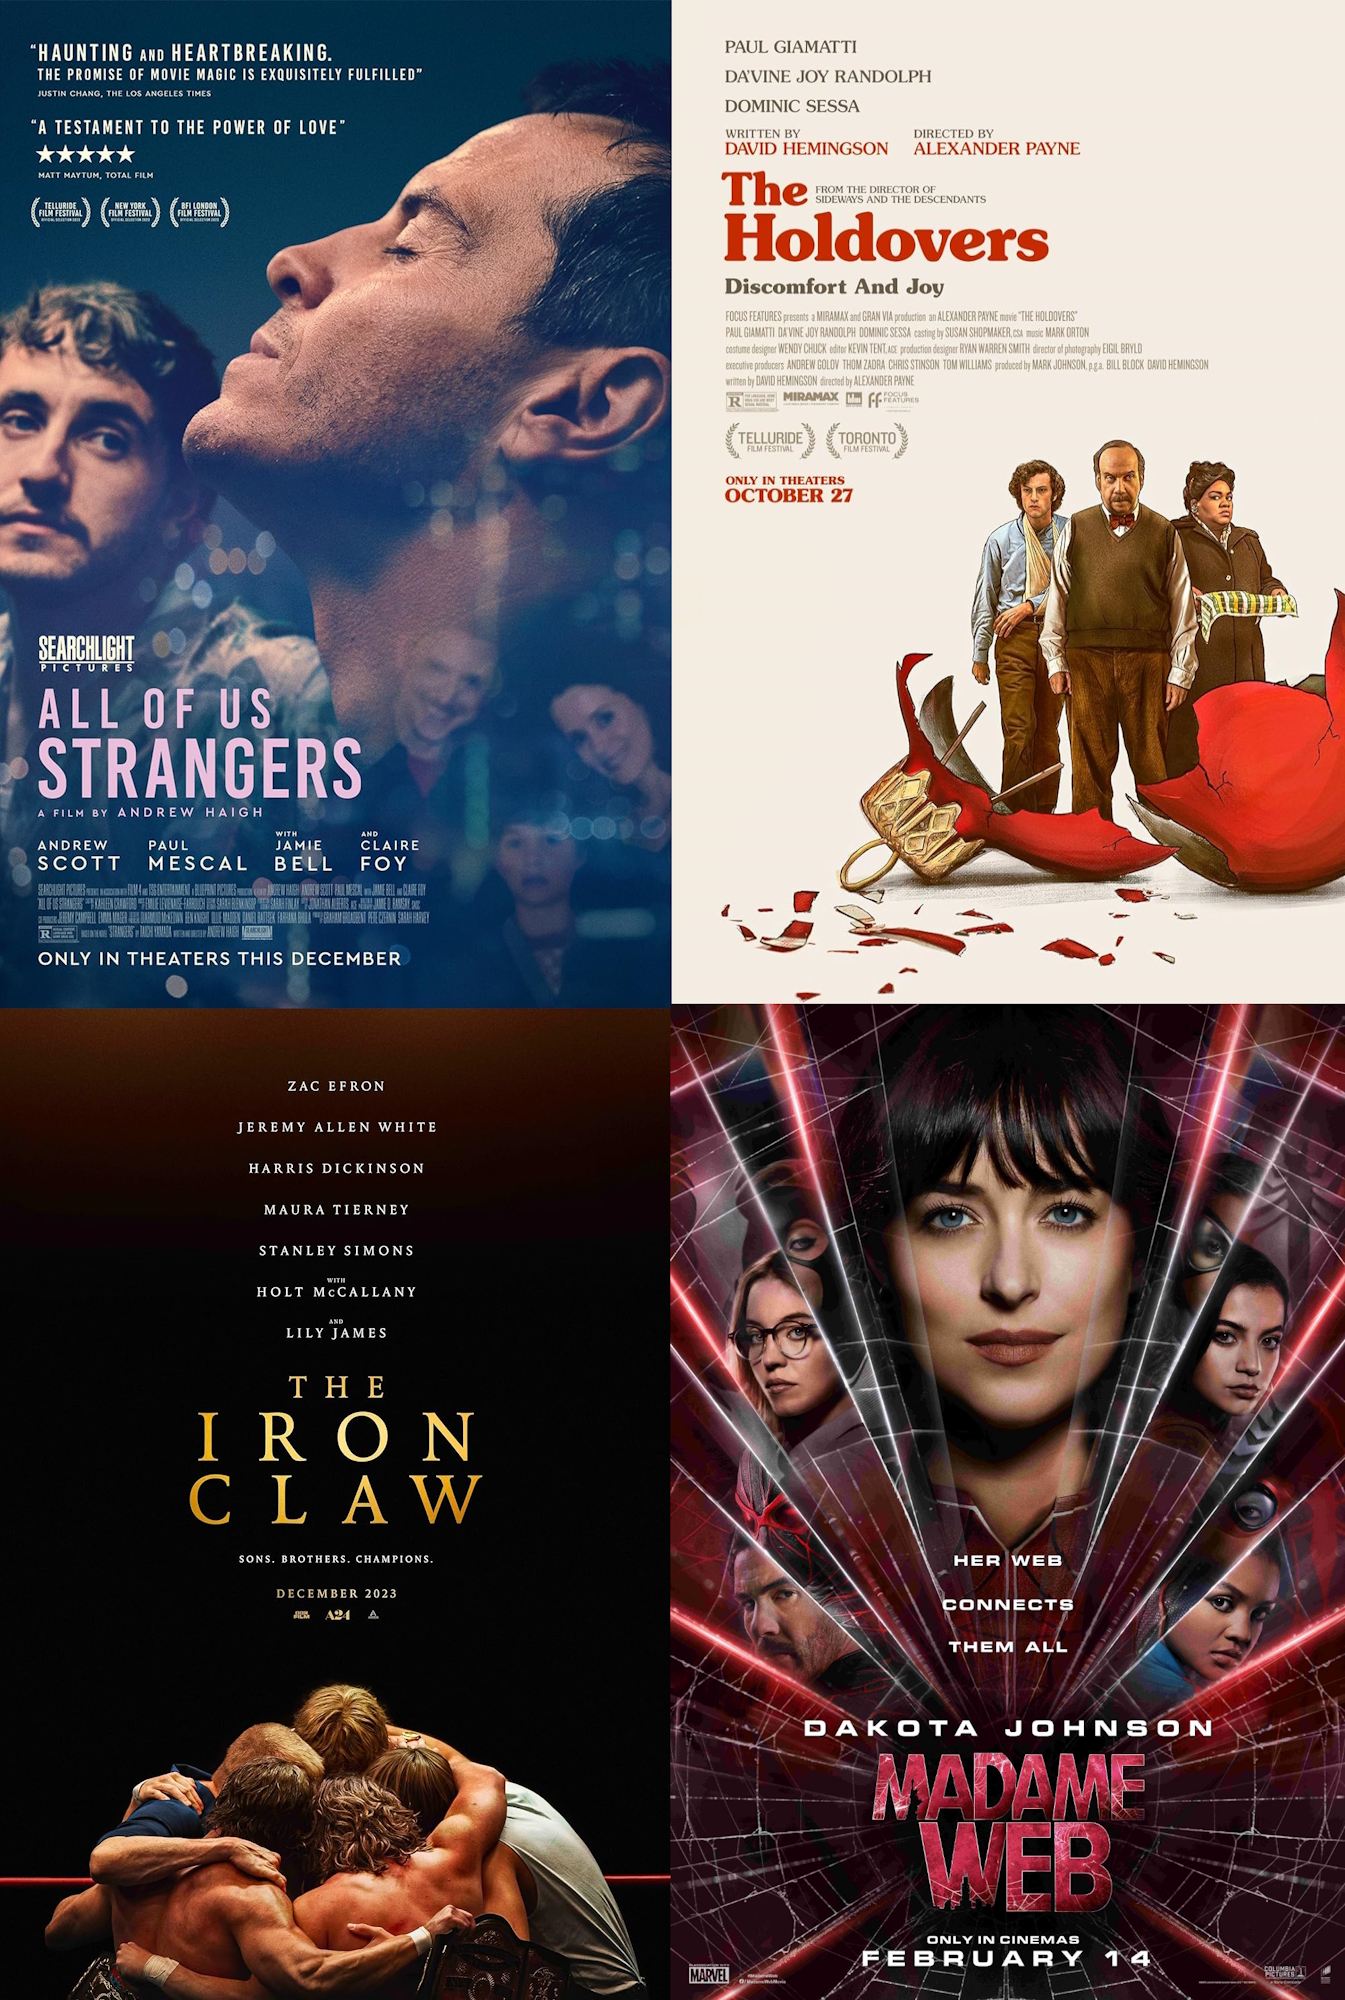 Cinema Corner: “All of Us Strangers”/”The Holdovers”/”The Iron Claw”/”Madame Web”